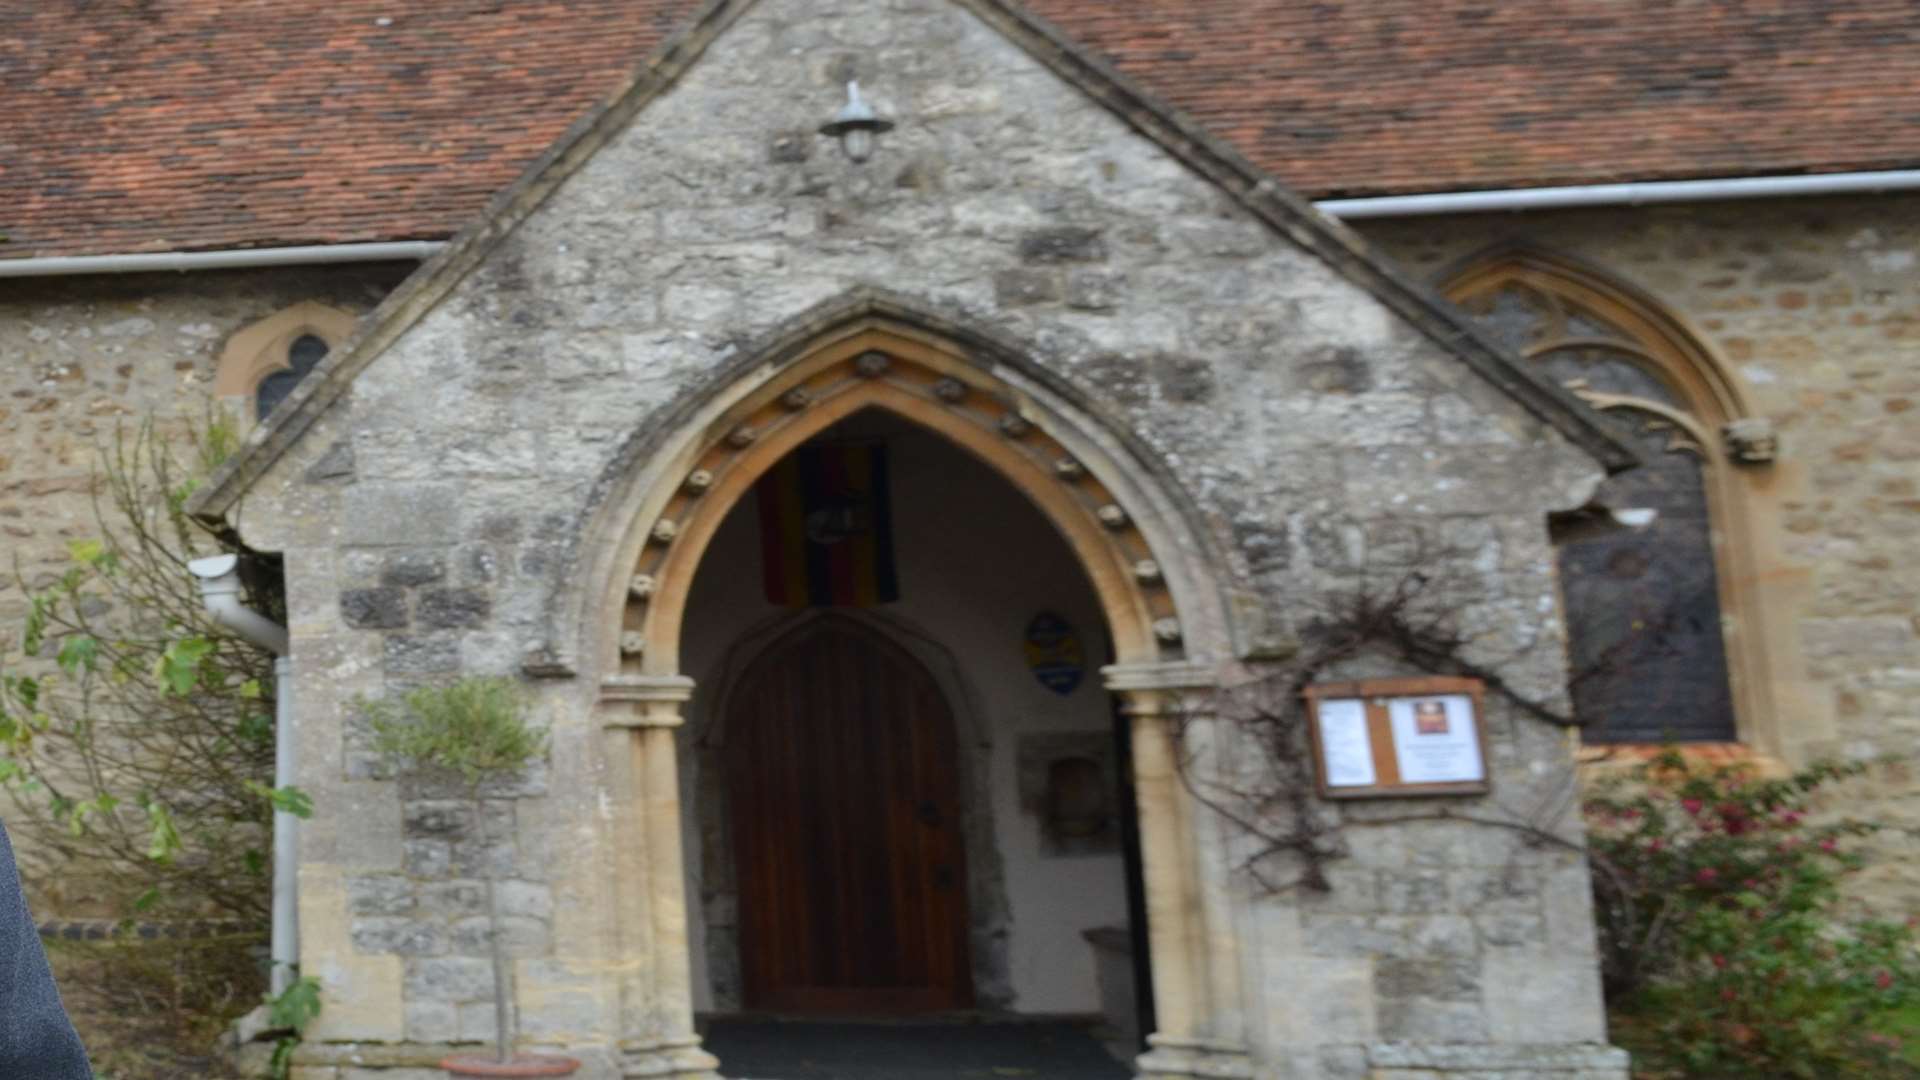 Holy Cross Church in Bearsted